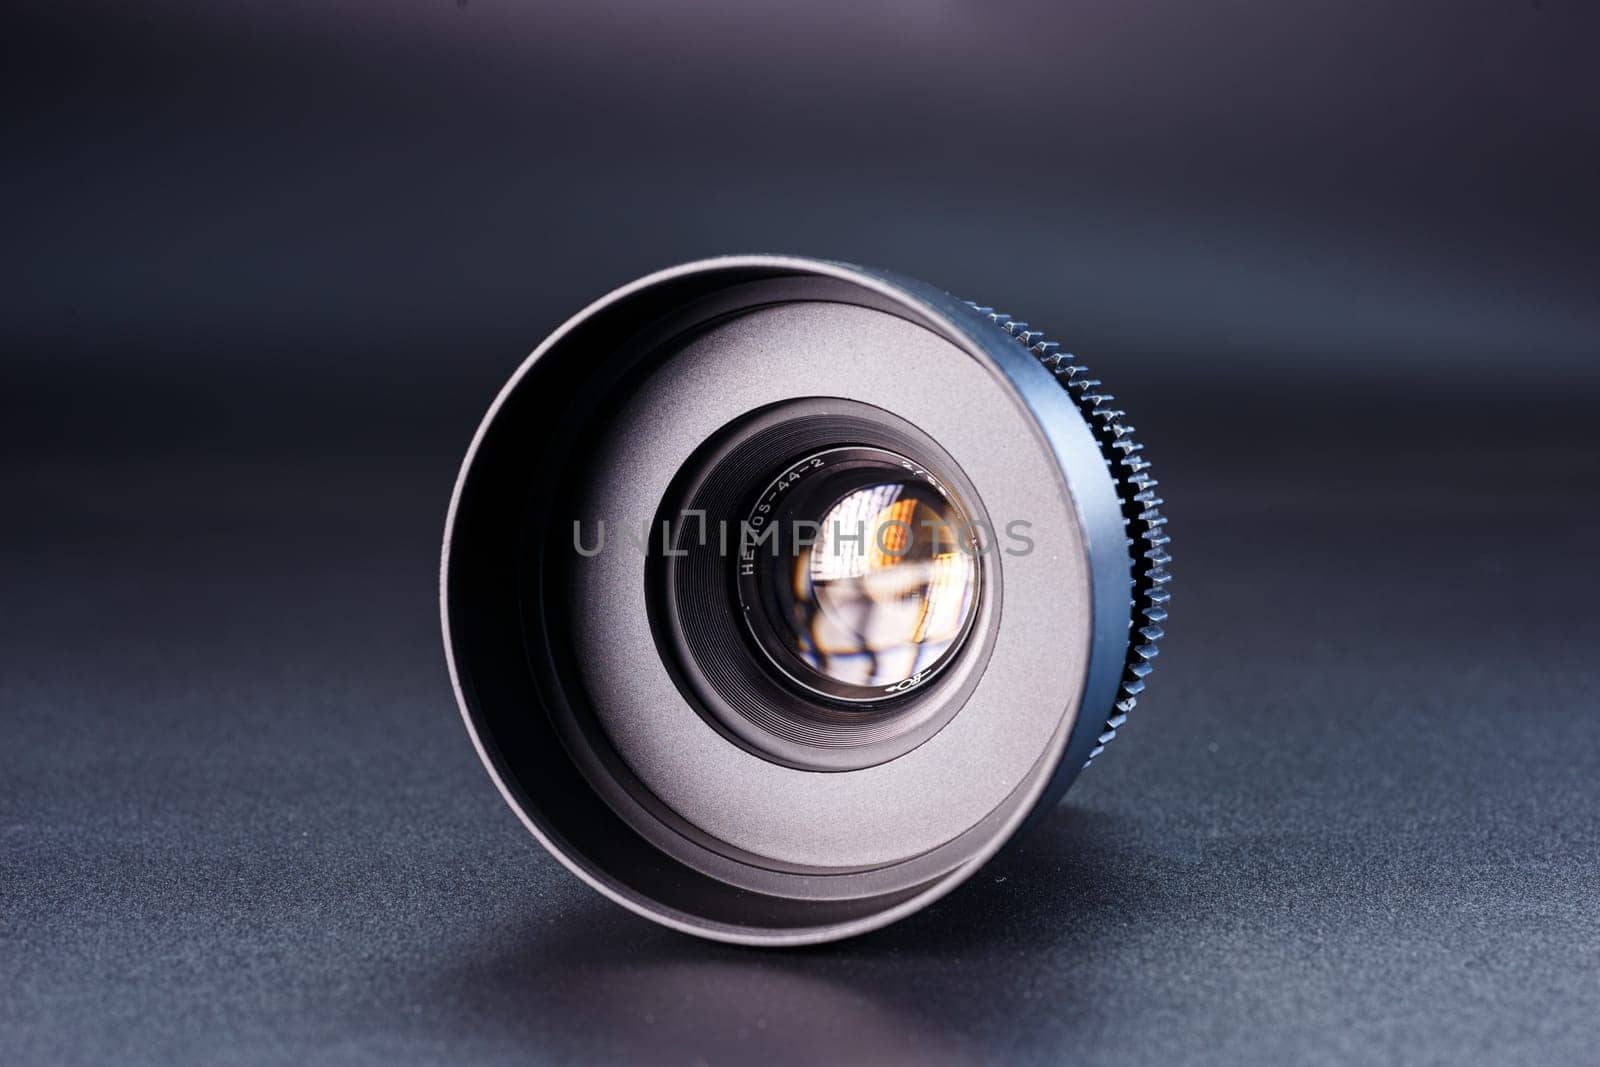 Close-up view of vintage Helios camera lens, black finish, photography gear on dark background, detailed focus rings visible, professional photographic equipment by mosfet_ua